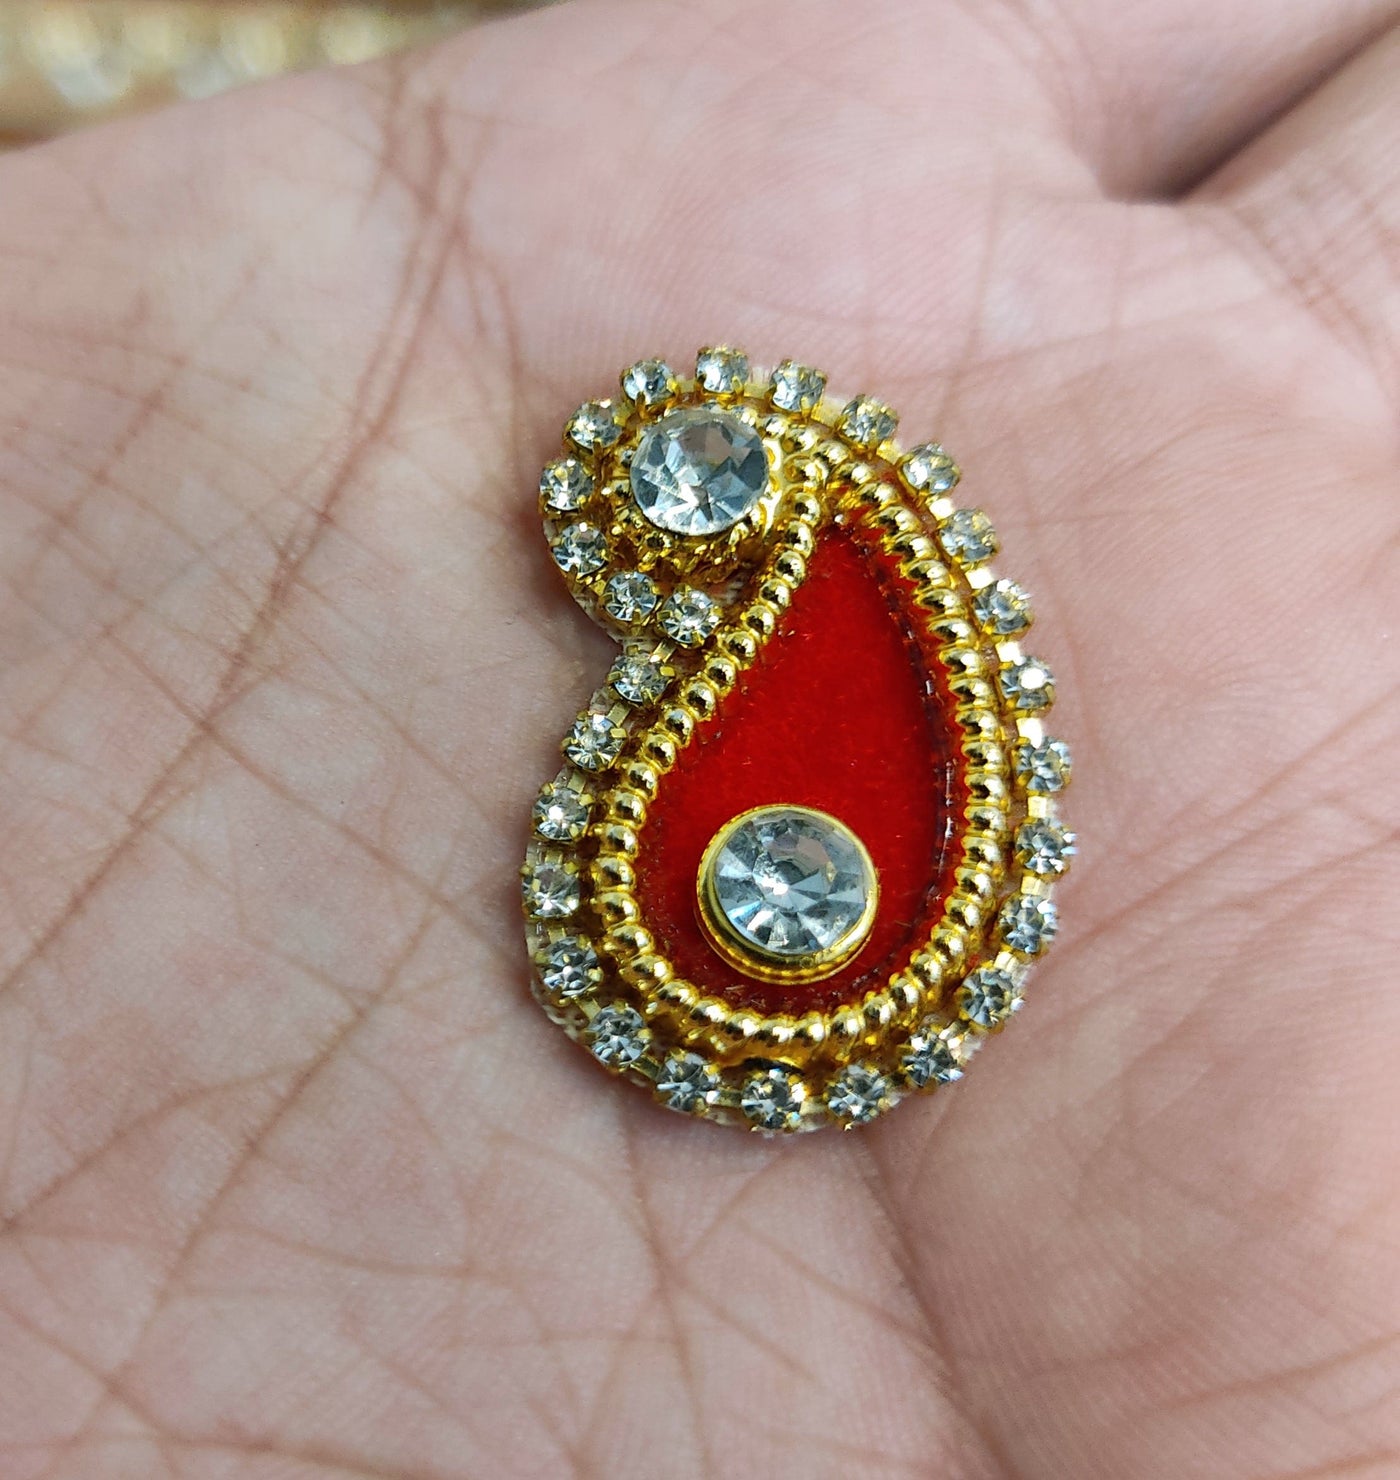 Lamansh Red Color Stone work Booti's for Various Art & Craft / Jewellery / Mala / Decorative / Festive season product making Raw material